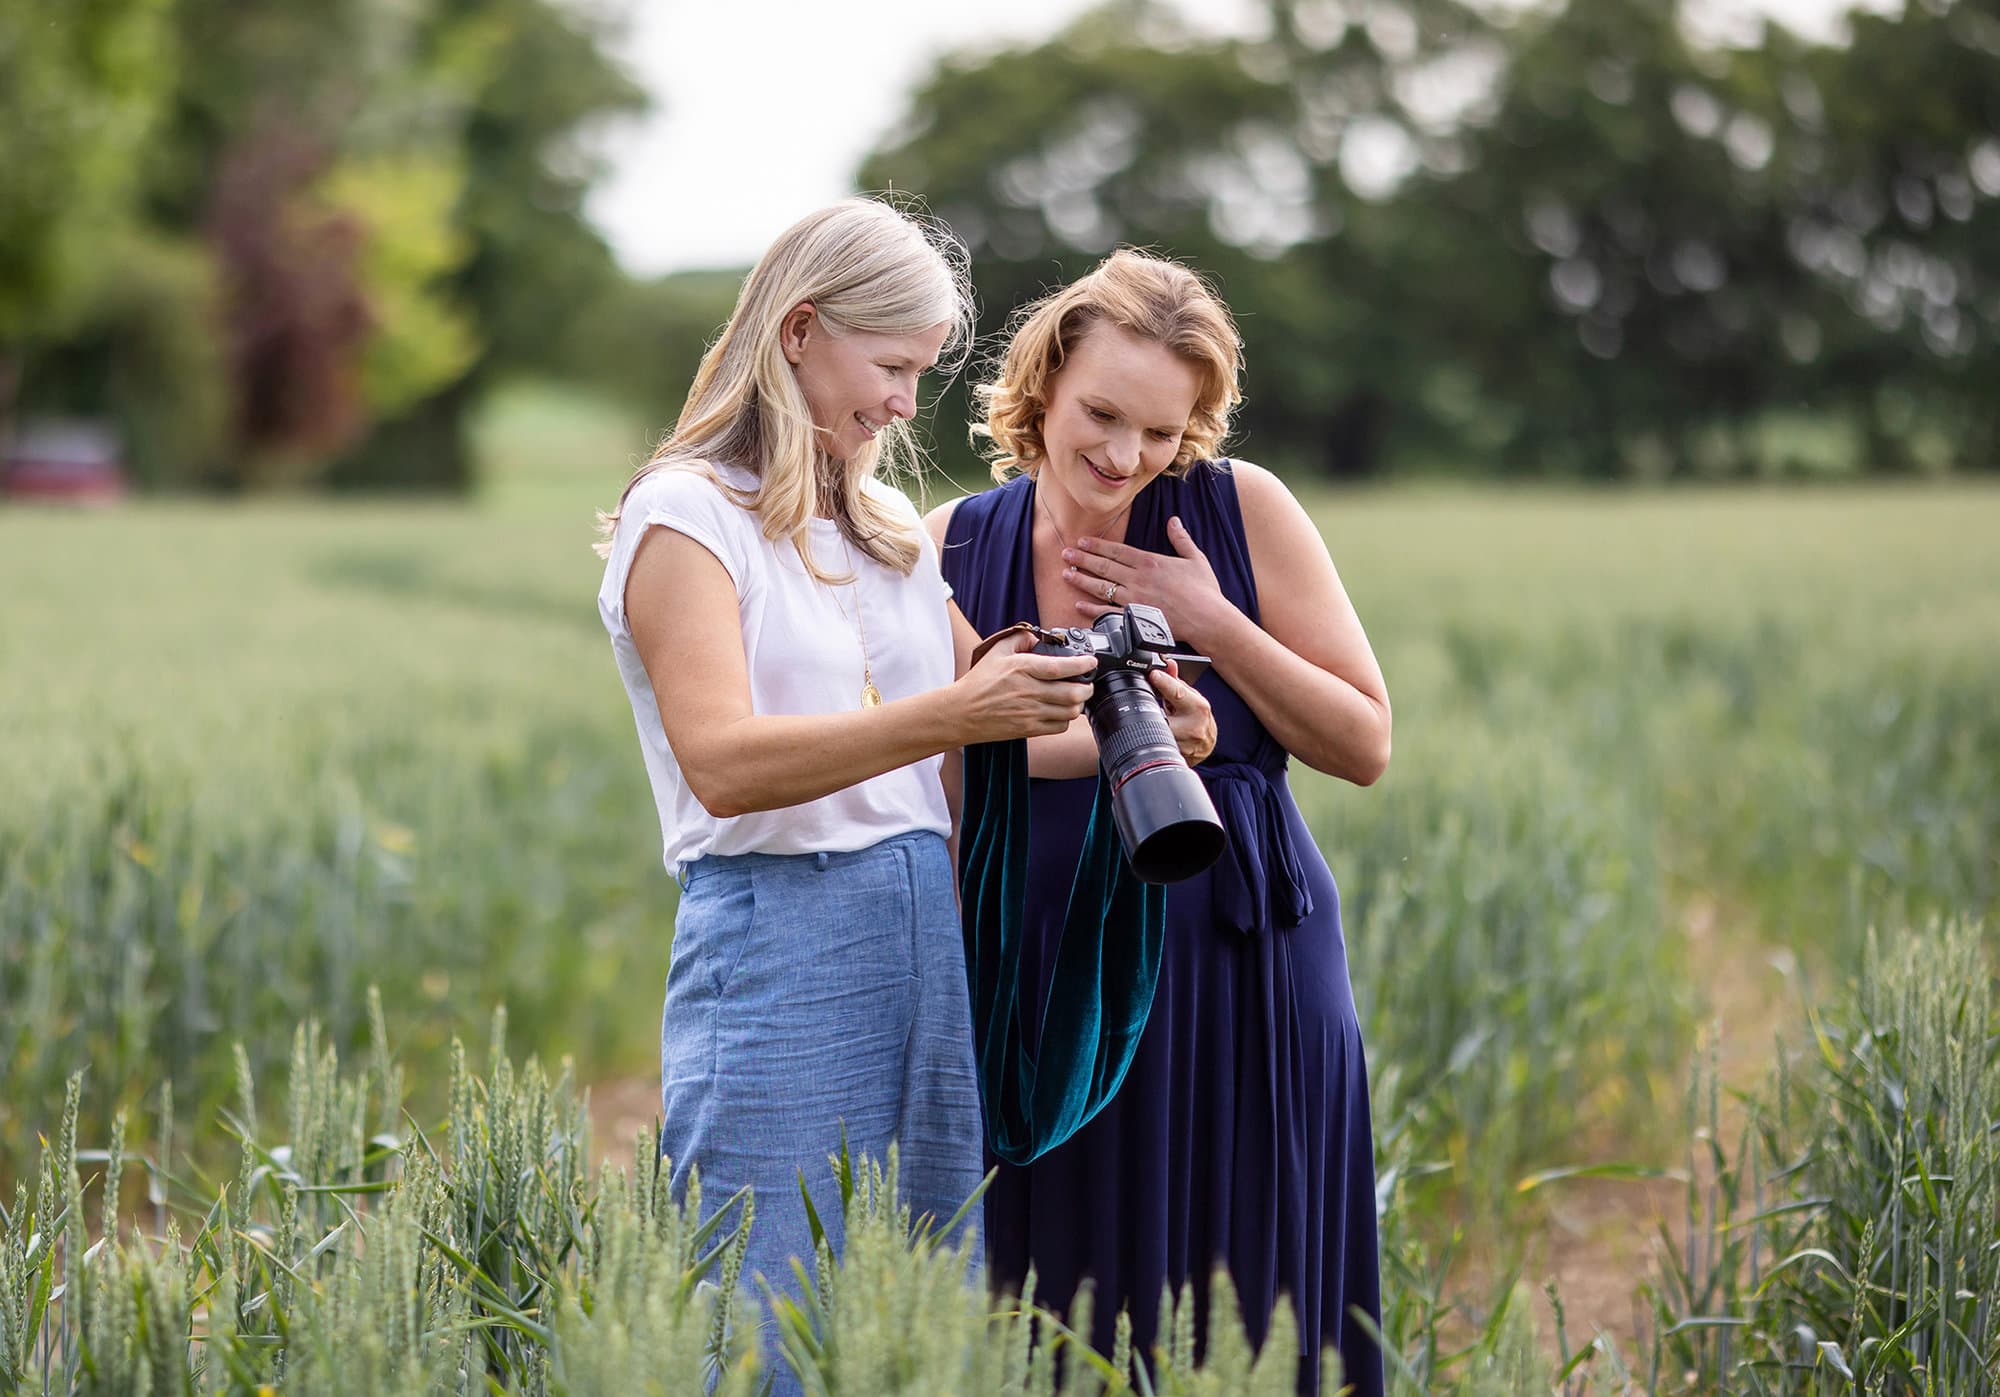 Alison McKenny shows her photos to a Maternity Client during Beginners Photography Workshop on Suffolk farm